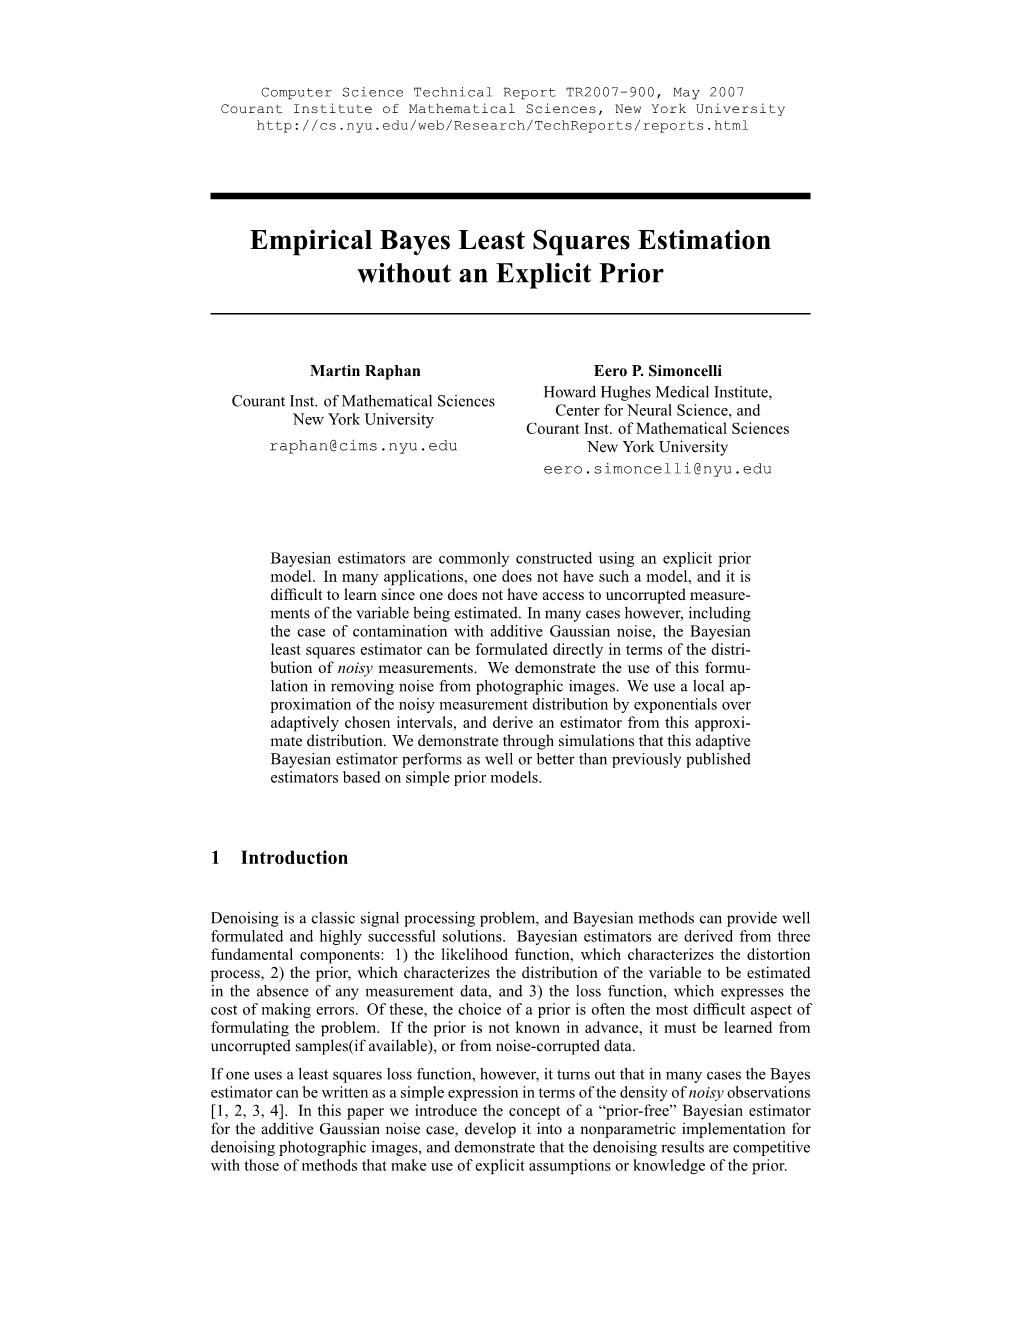 Empirical Bayes Least Squares Estimation Without an Explicit Prior